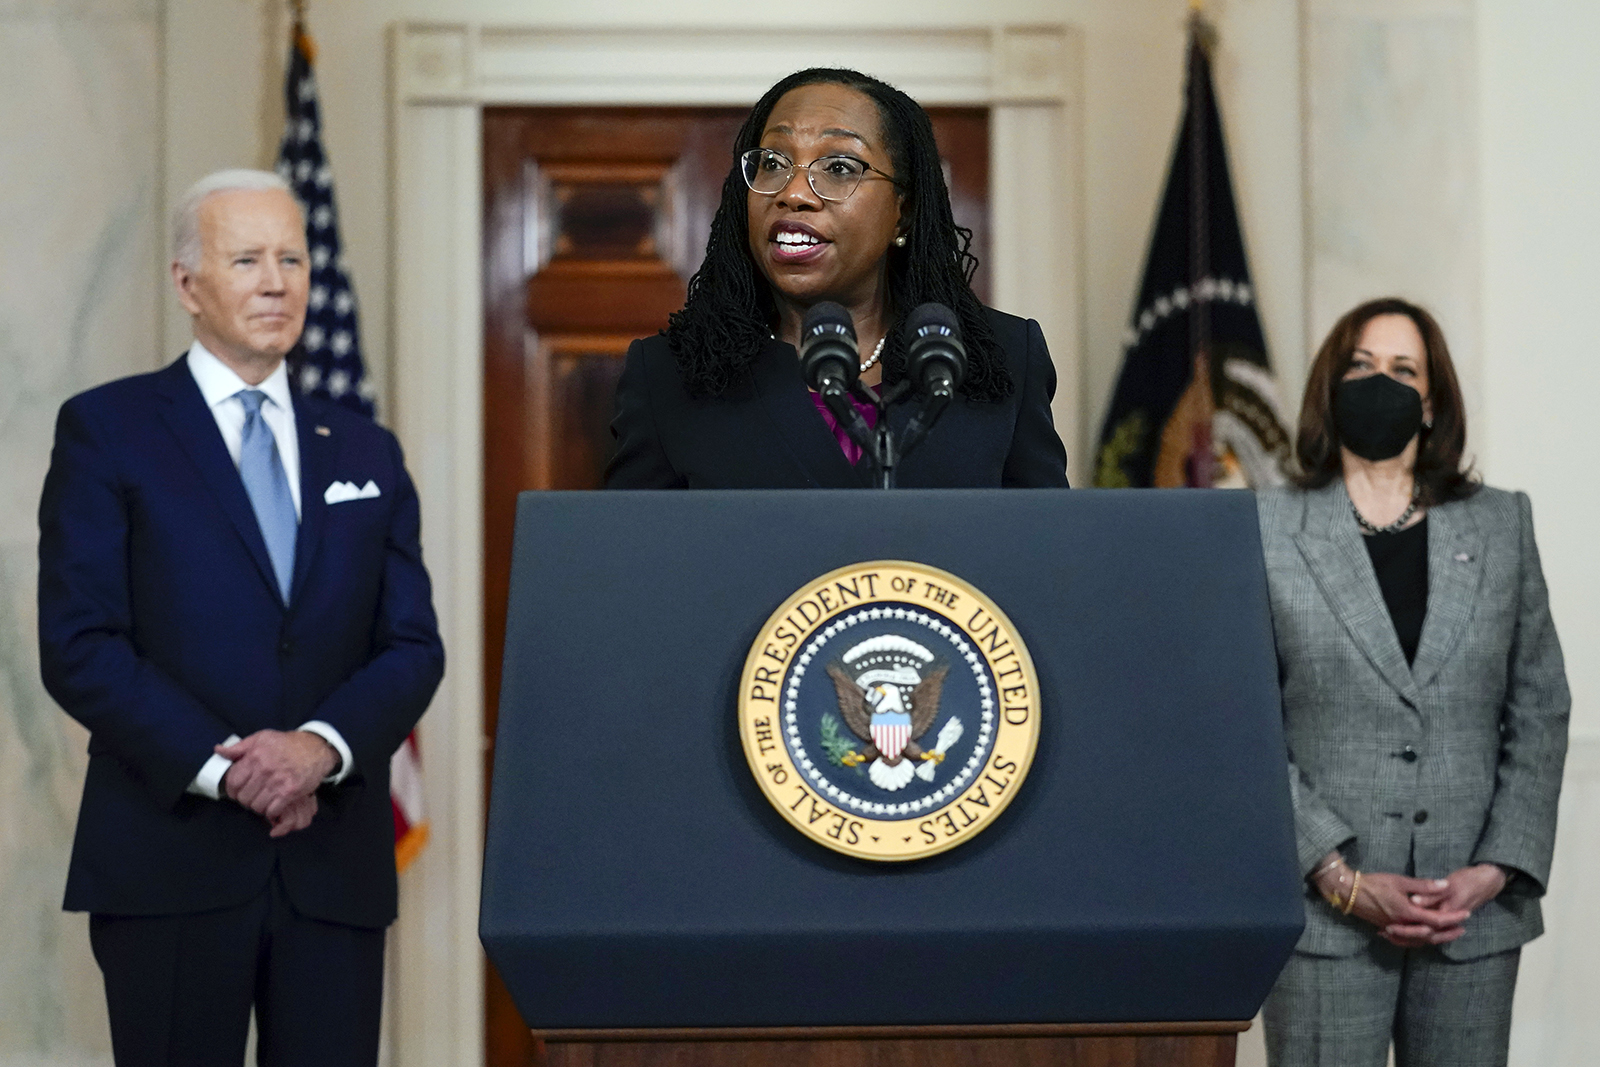 Judge Ketanji Brown Jackson speaks after President Joe Biden announced Jackson as his nominee to the Supreme Court in the Cross Hall of the White House, Friday, Feb. 25, 2022, in Washington. Vice President Kamala Harris listens at right. (AP Photo/Carolyn Kaster)